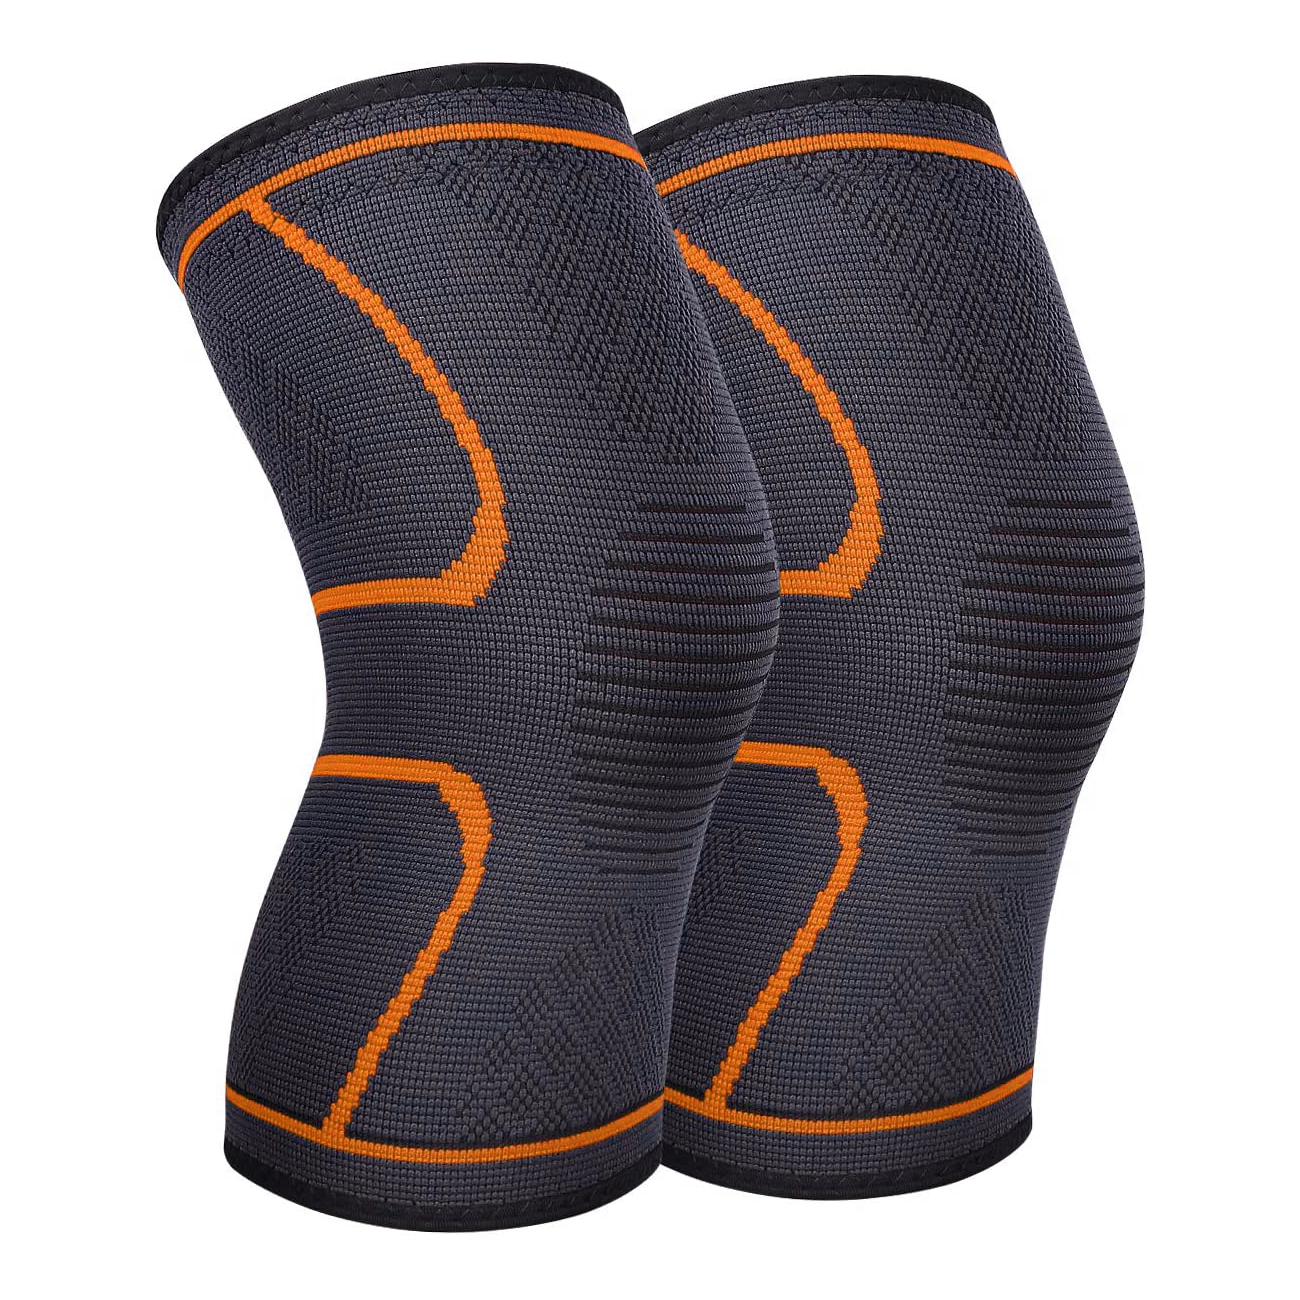 2x Knee Sleeve Compression Brace Support For Sports Joint Pain Arthritis Relief 